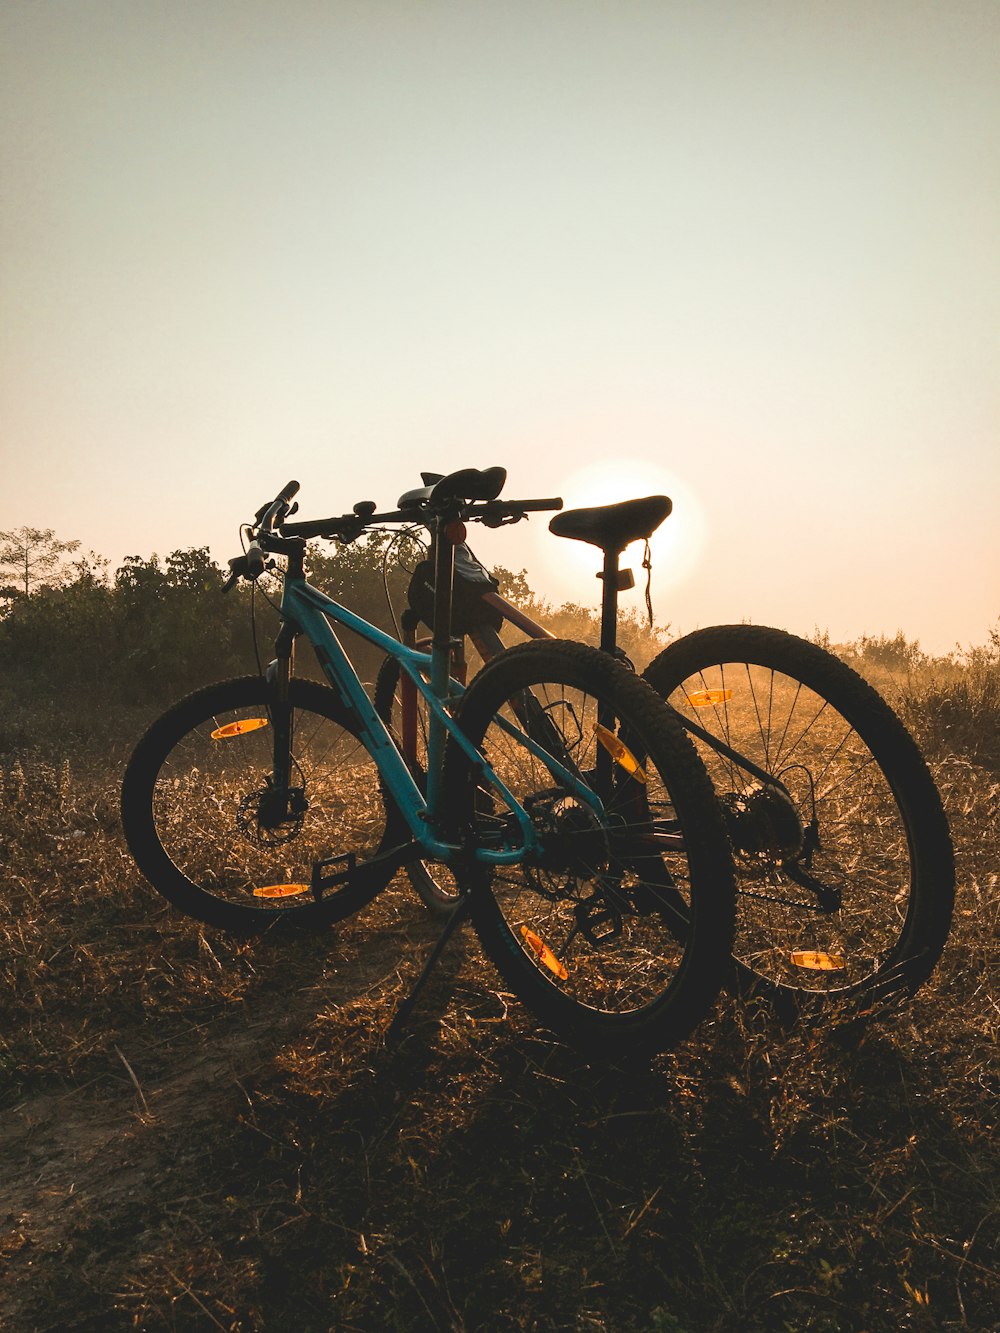 blue and black mountain bike on brown field during daytime